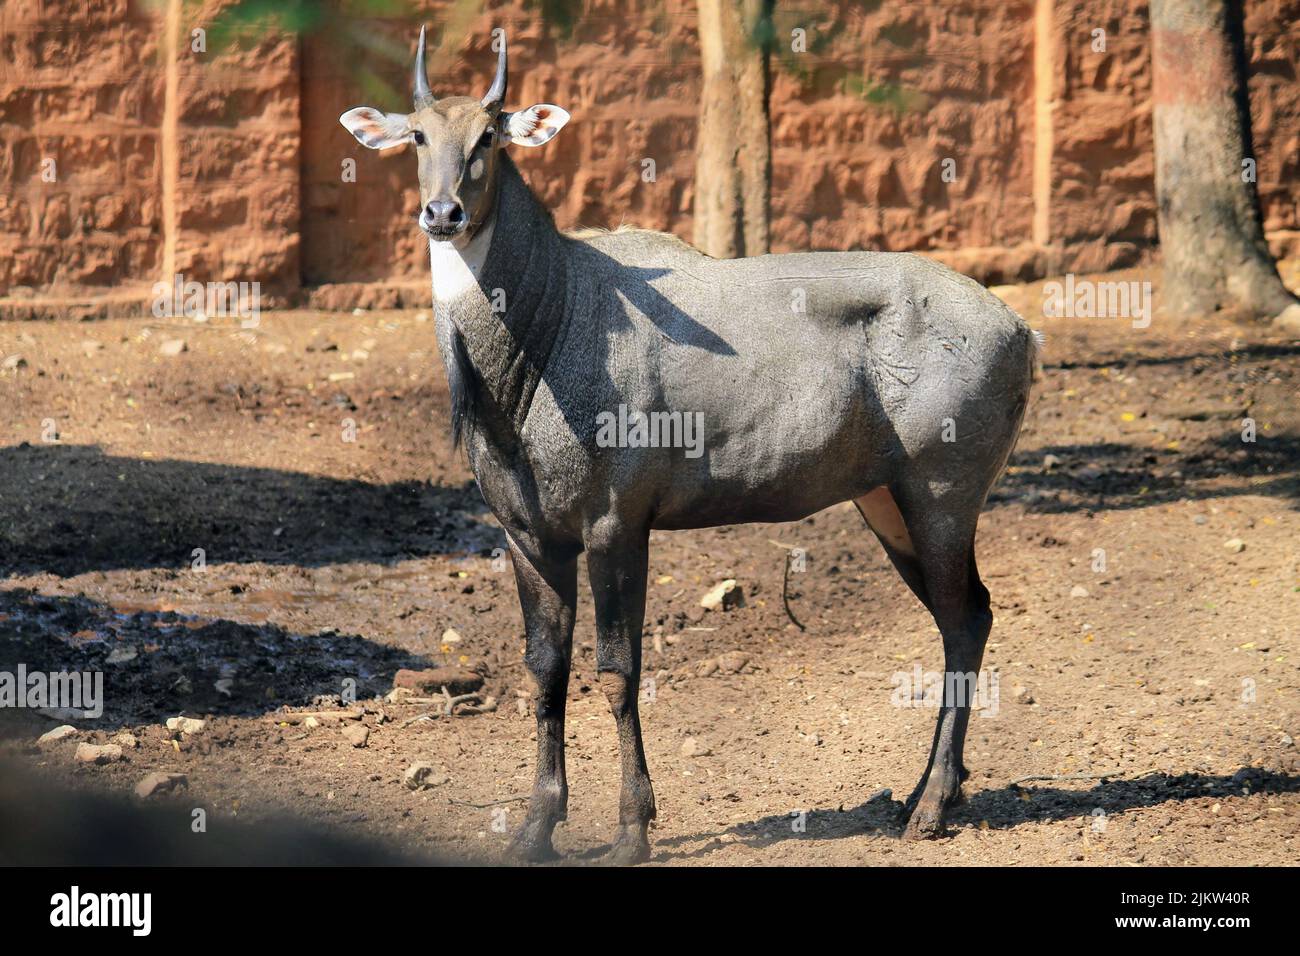 A nilgai standing in a zoo in a daylight Stock Photo